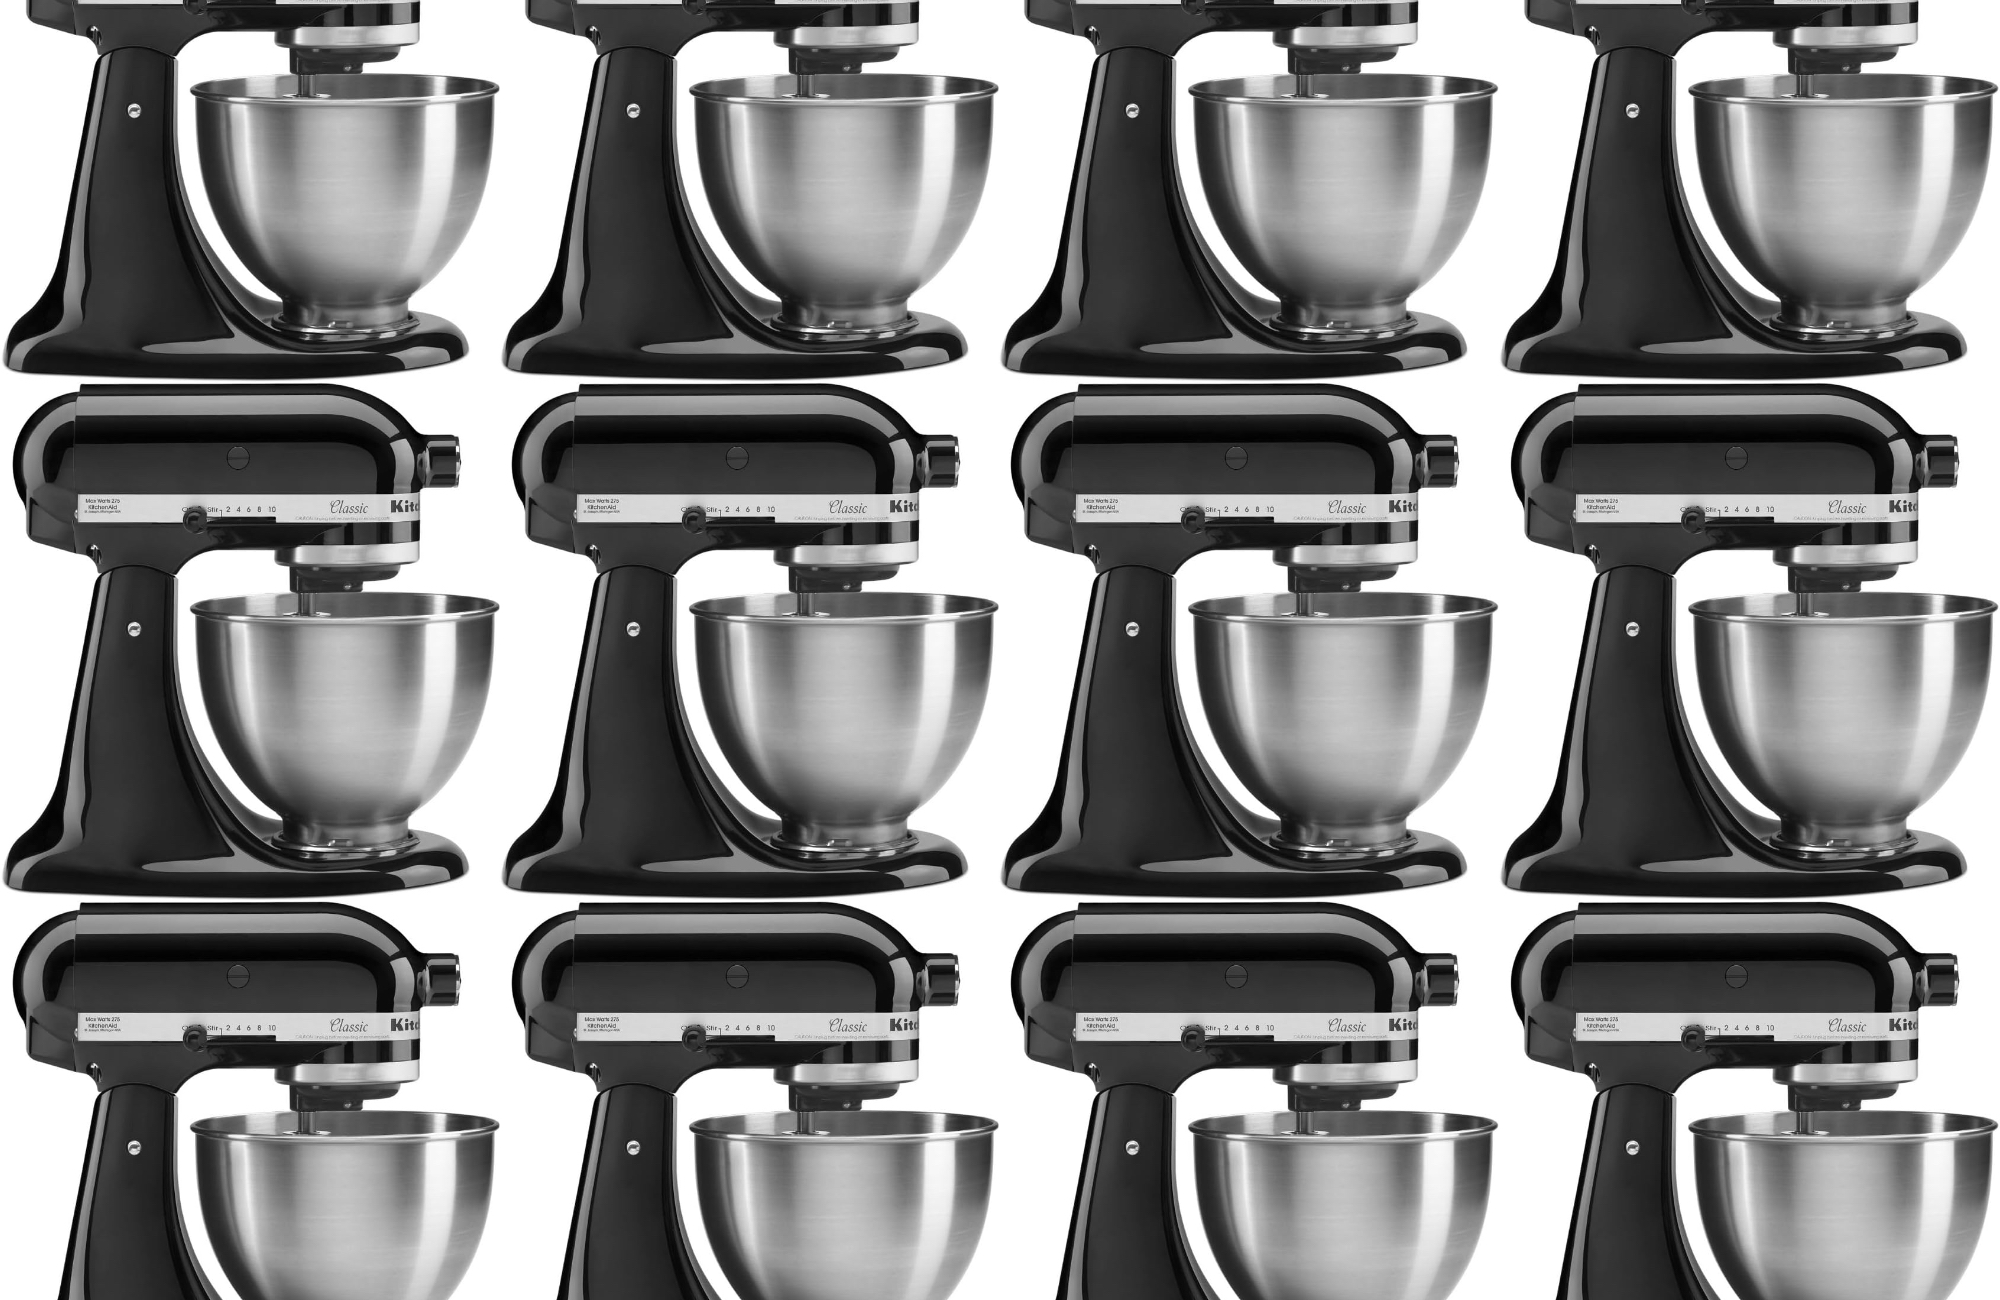 Get a KitchenAid stand mixer for just $250 at Amazon